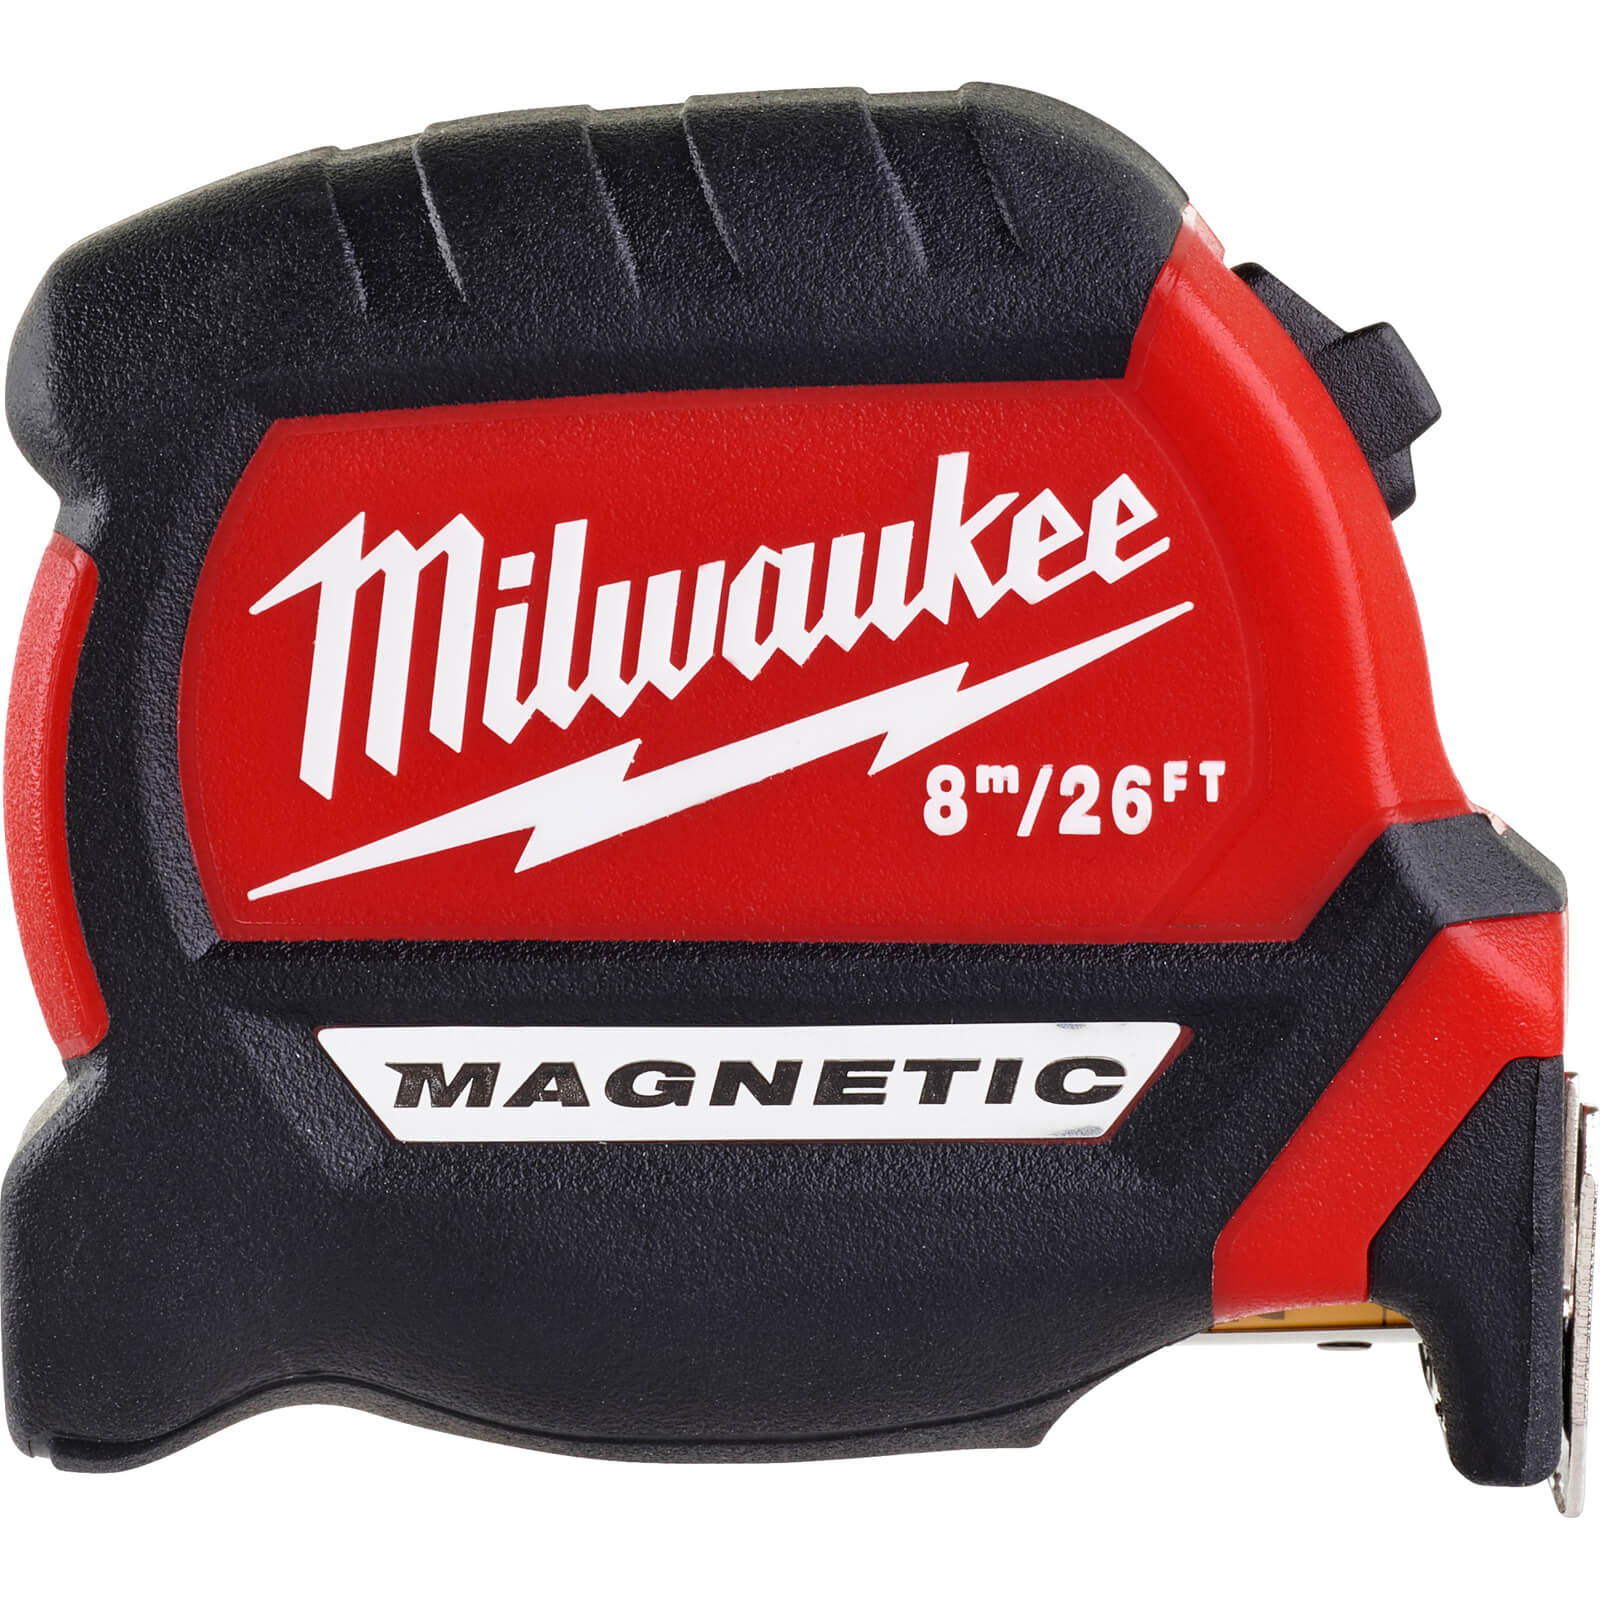 Image of Milwaukee MAG Tape Measure Imperial & Metric 26ft / 8m 27mm